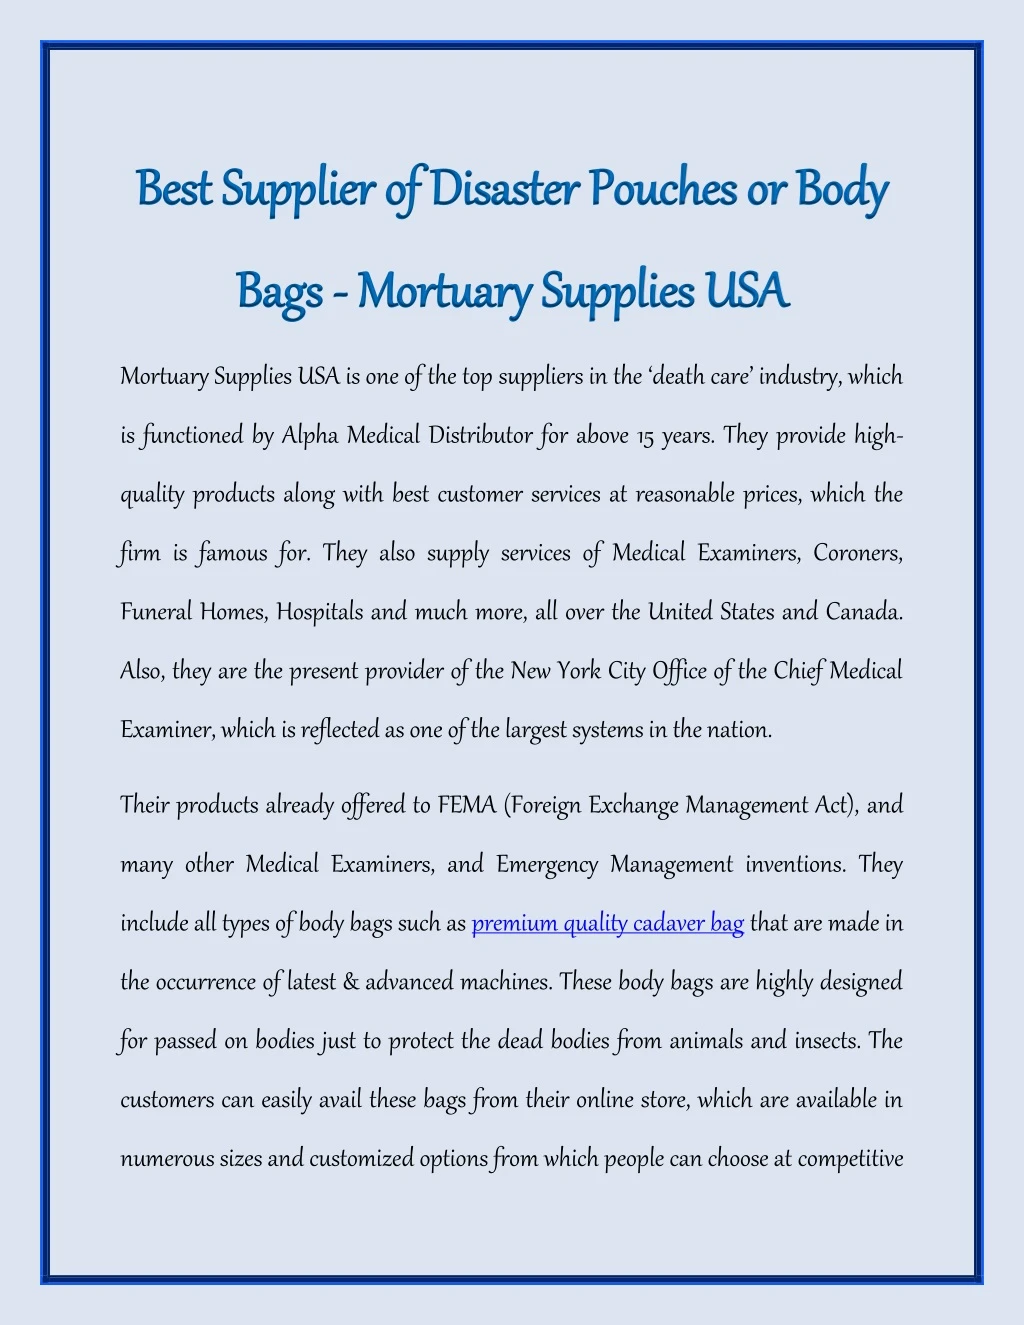 best supplier of disaster pouches or body best